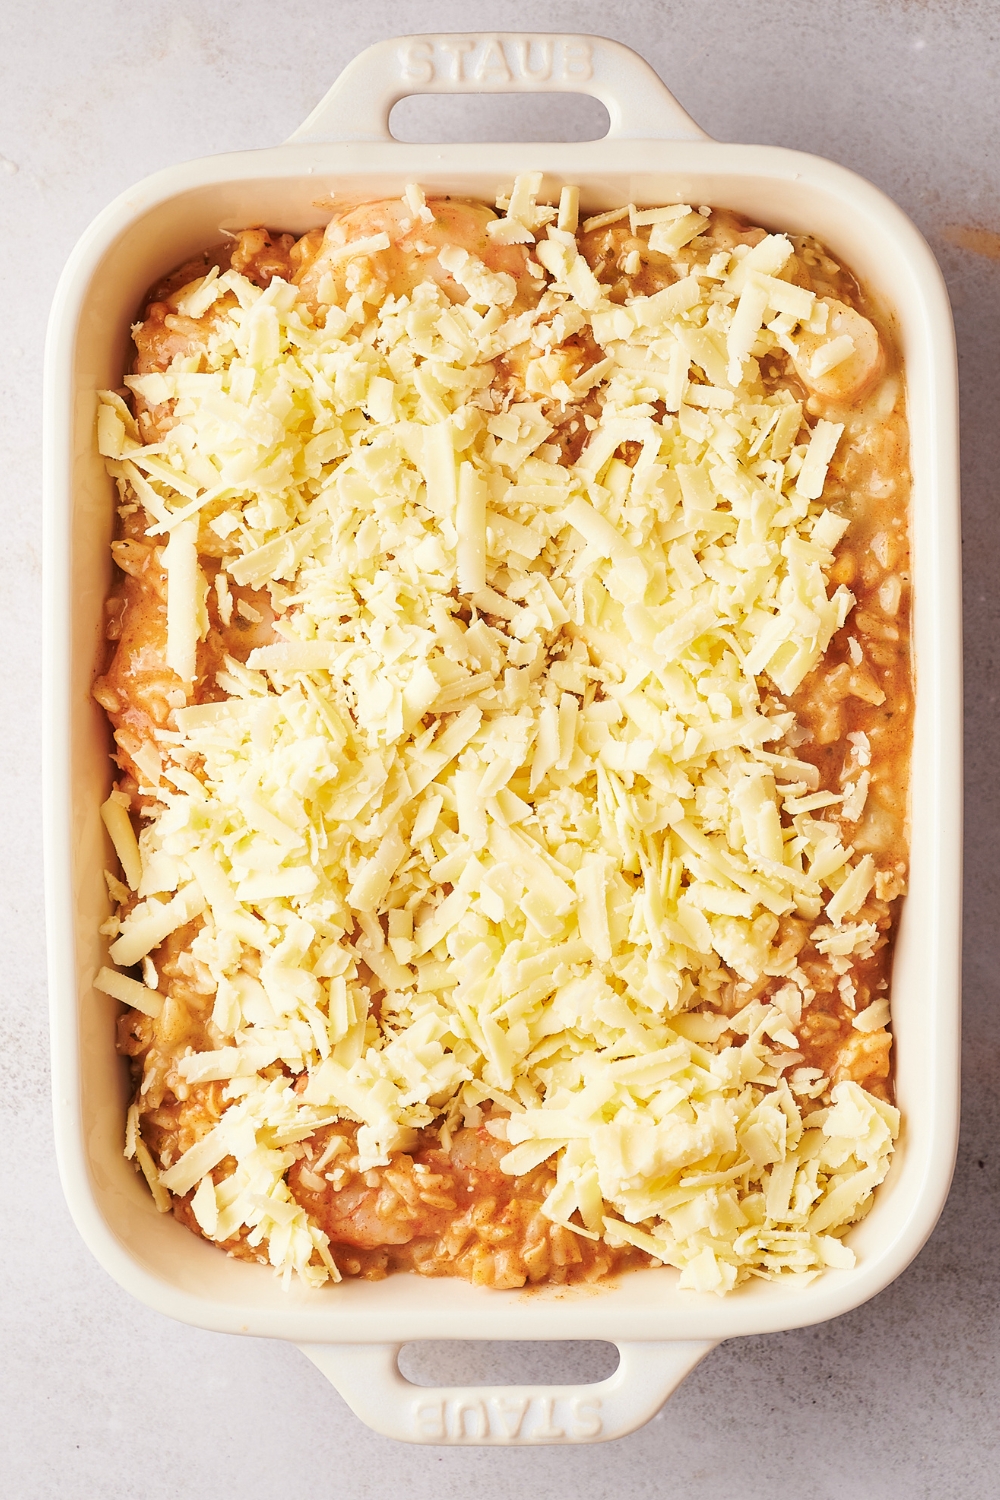 A casserole dish with uncooked shrimp casserole sprinkled with shredded cheese.